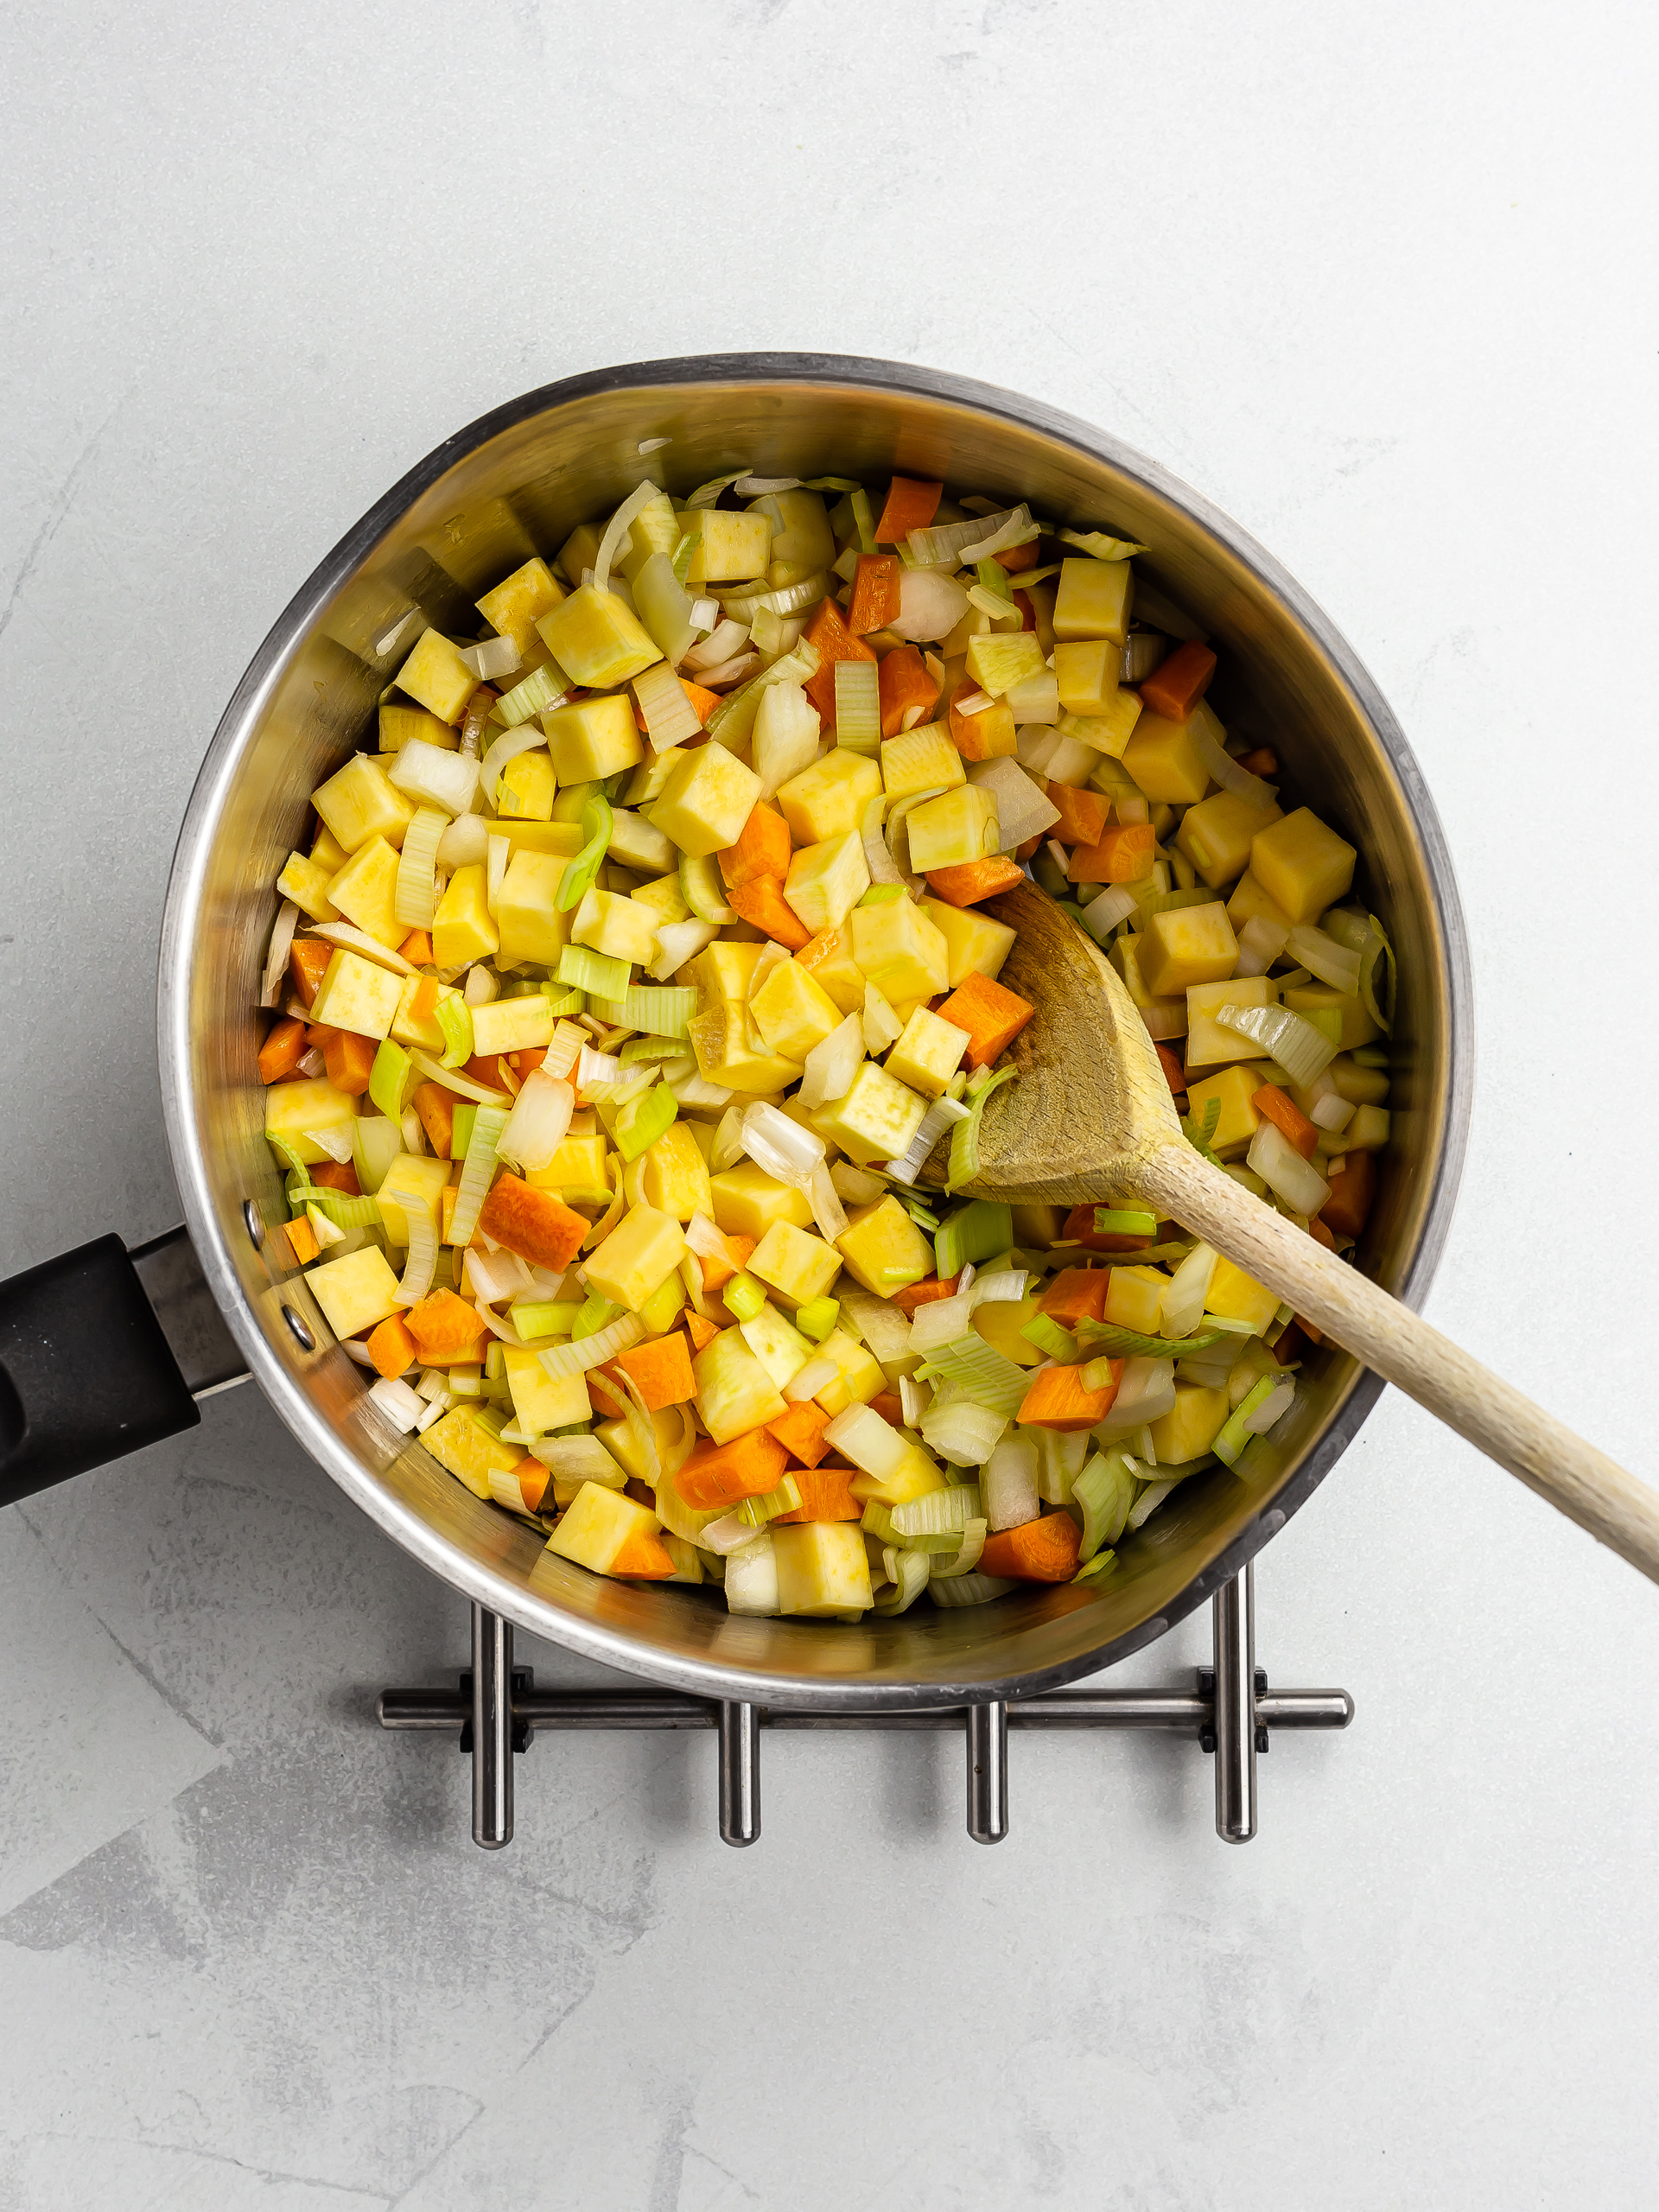 scotch broth vegetables in a pot